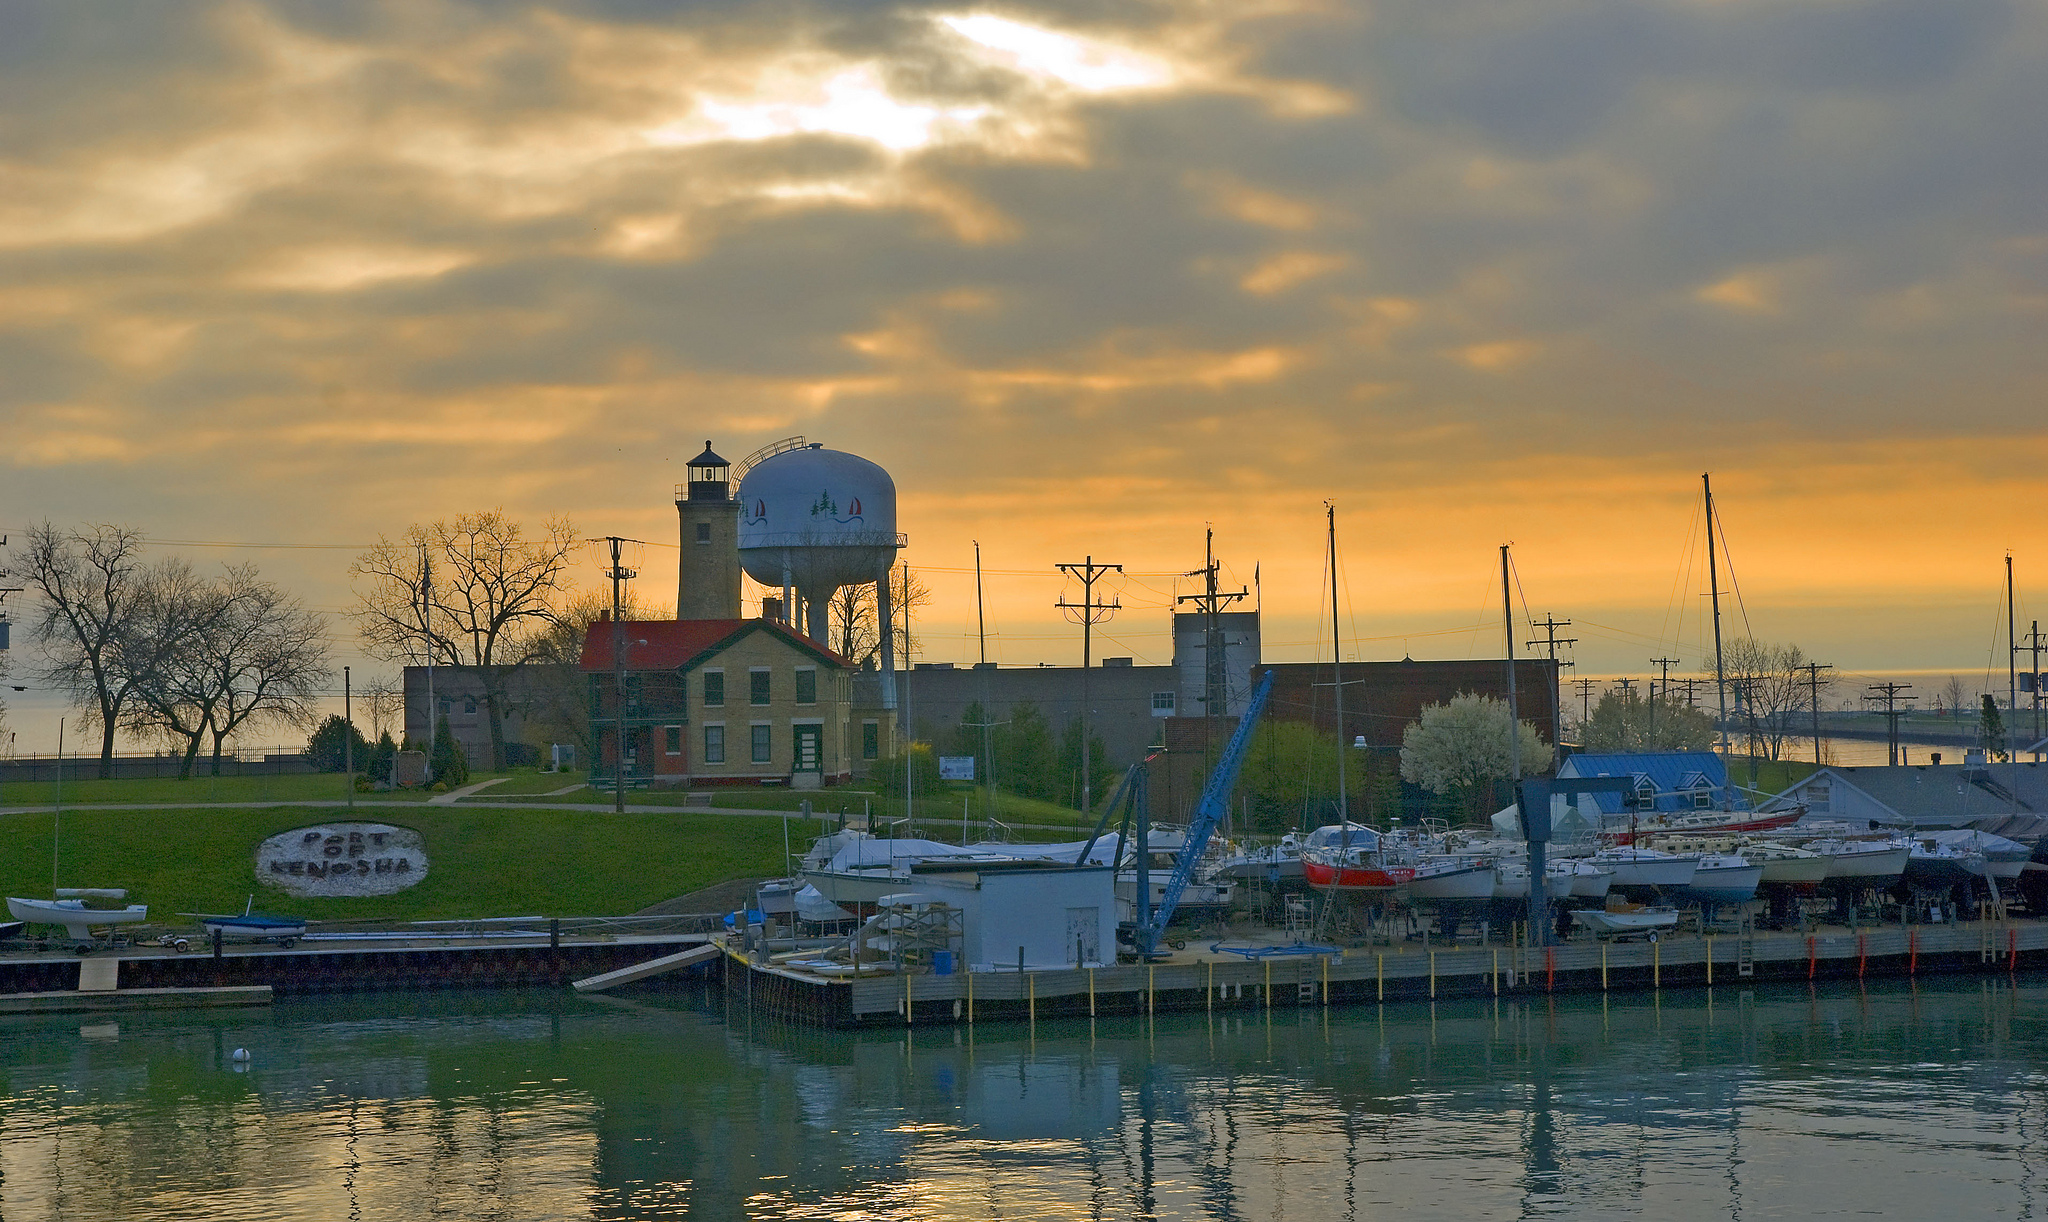 Pictured here in 2012, the Port of Kenosha sits along Lake Michigan. Its historic light station is seen in the middle ground of the photograph.